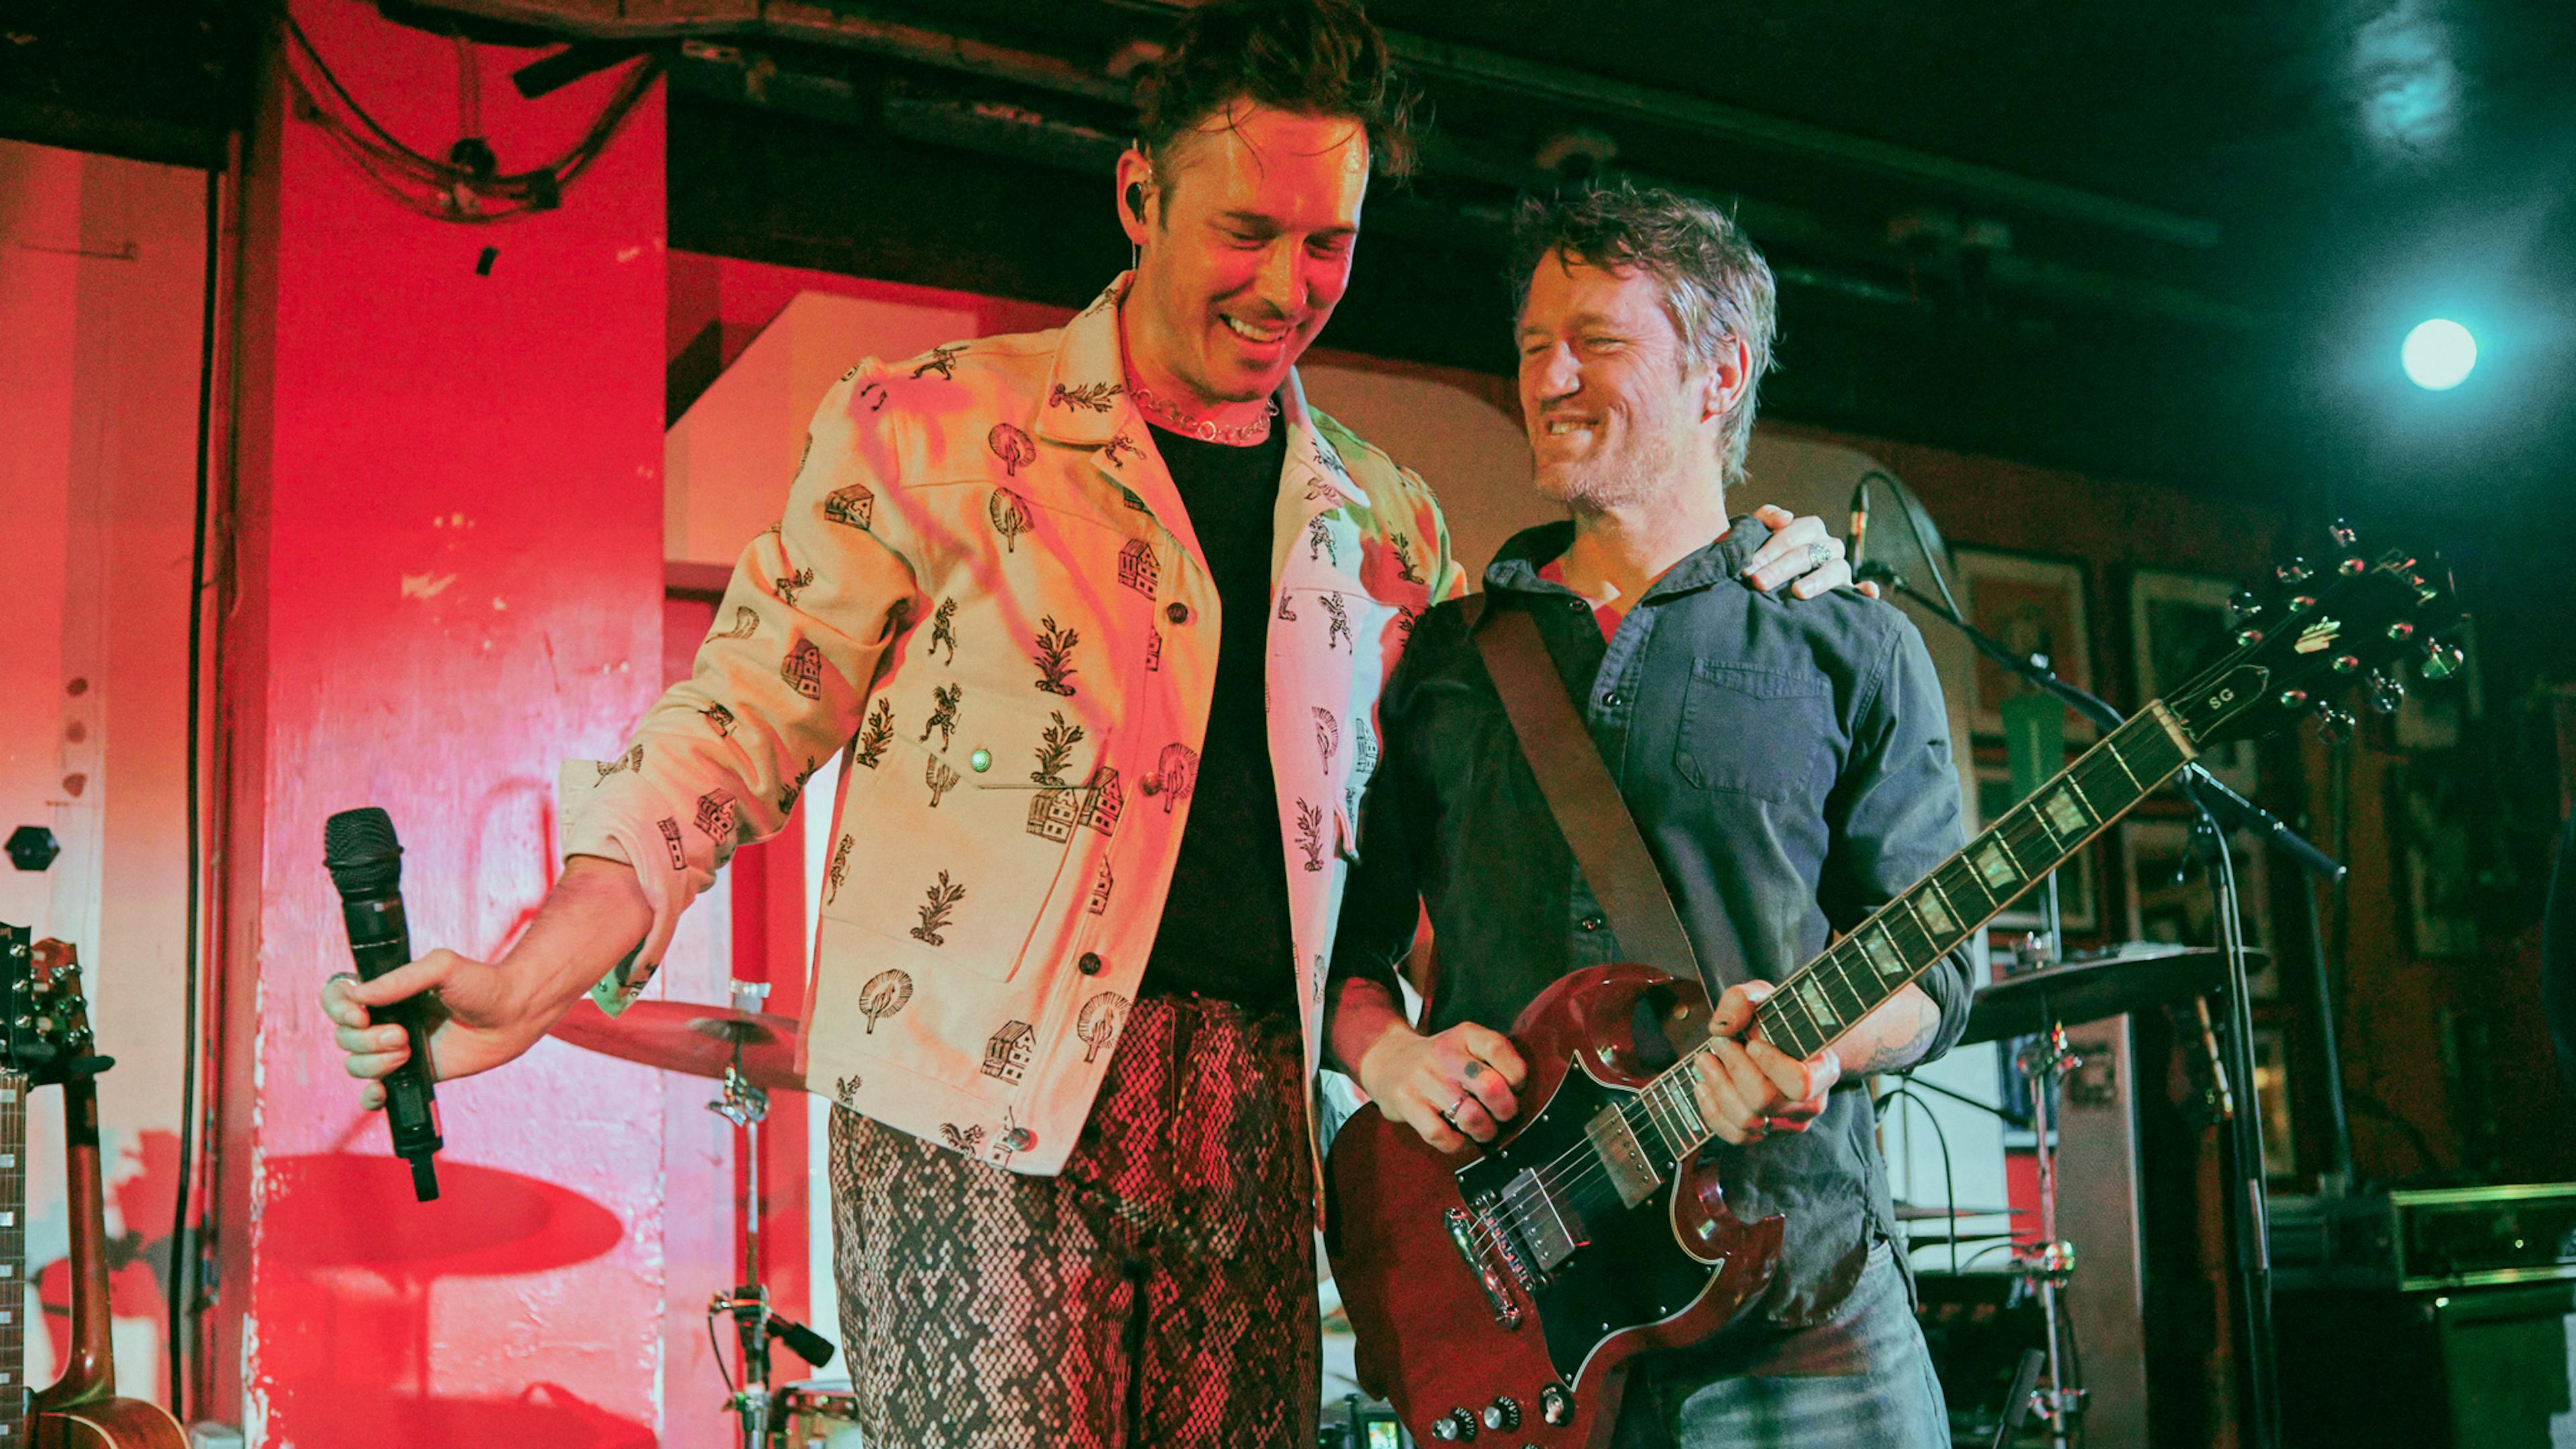 Foo Fighters’ Chris Shiflett makes surprise appearance at London’s 100 Club